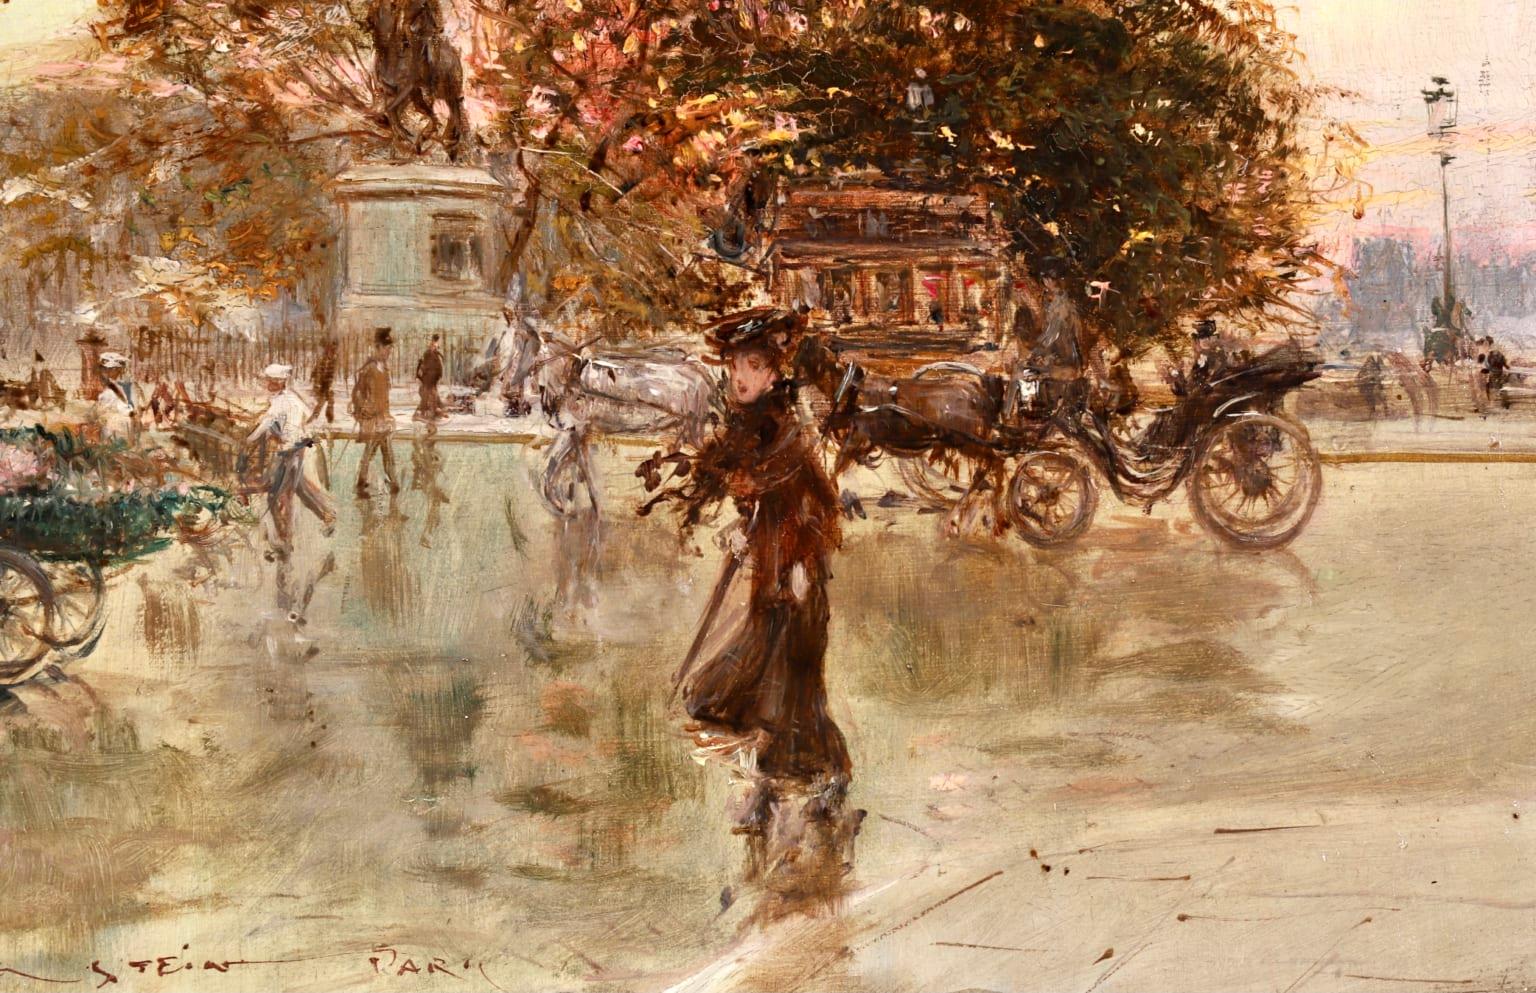 A charming and uniquely brushed 19th century impressionist oil on panel circa 1900 by French painter Georges Stein depicting the activities in the streets outside La Samaritane on a windy day in Paris. La Samaritaine was a large department store in